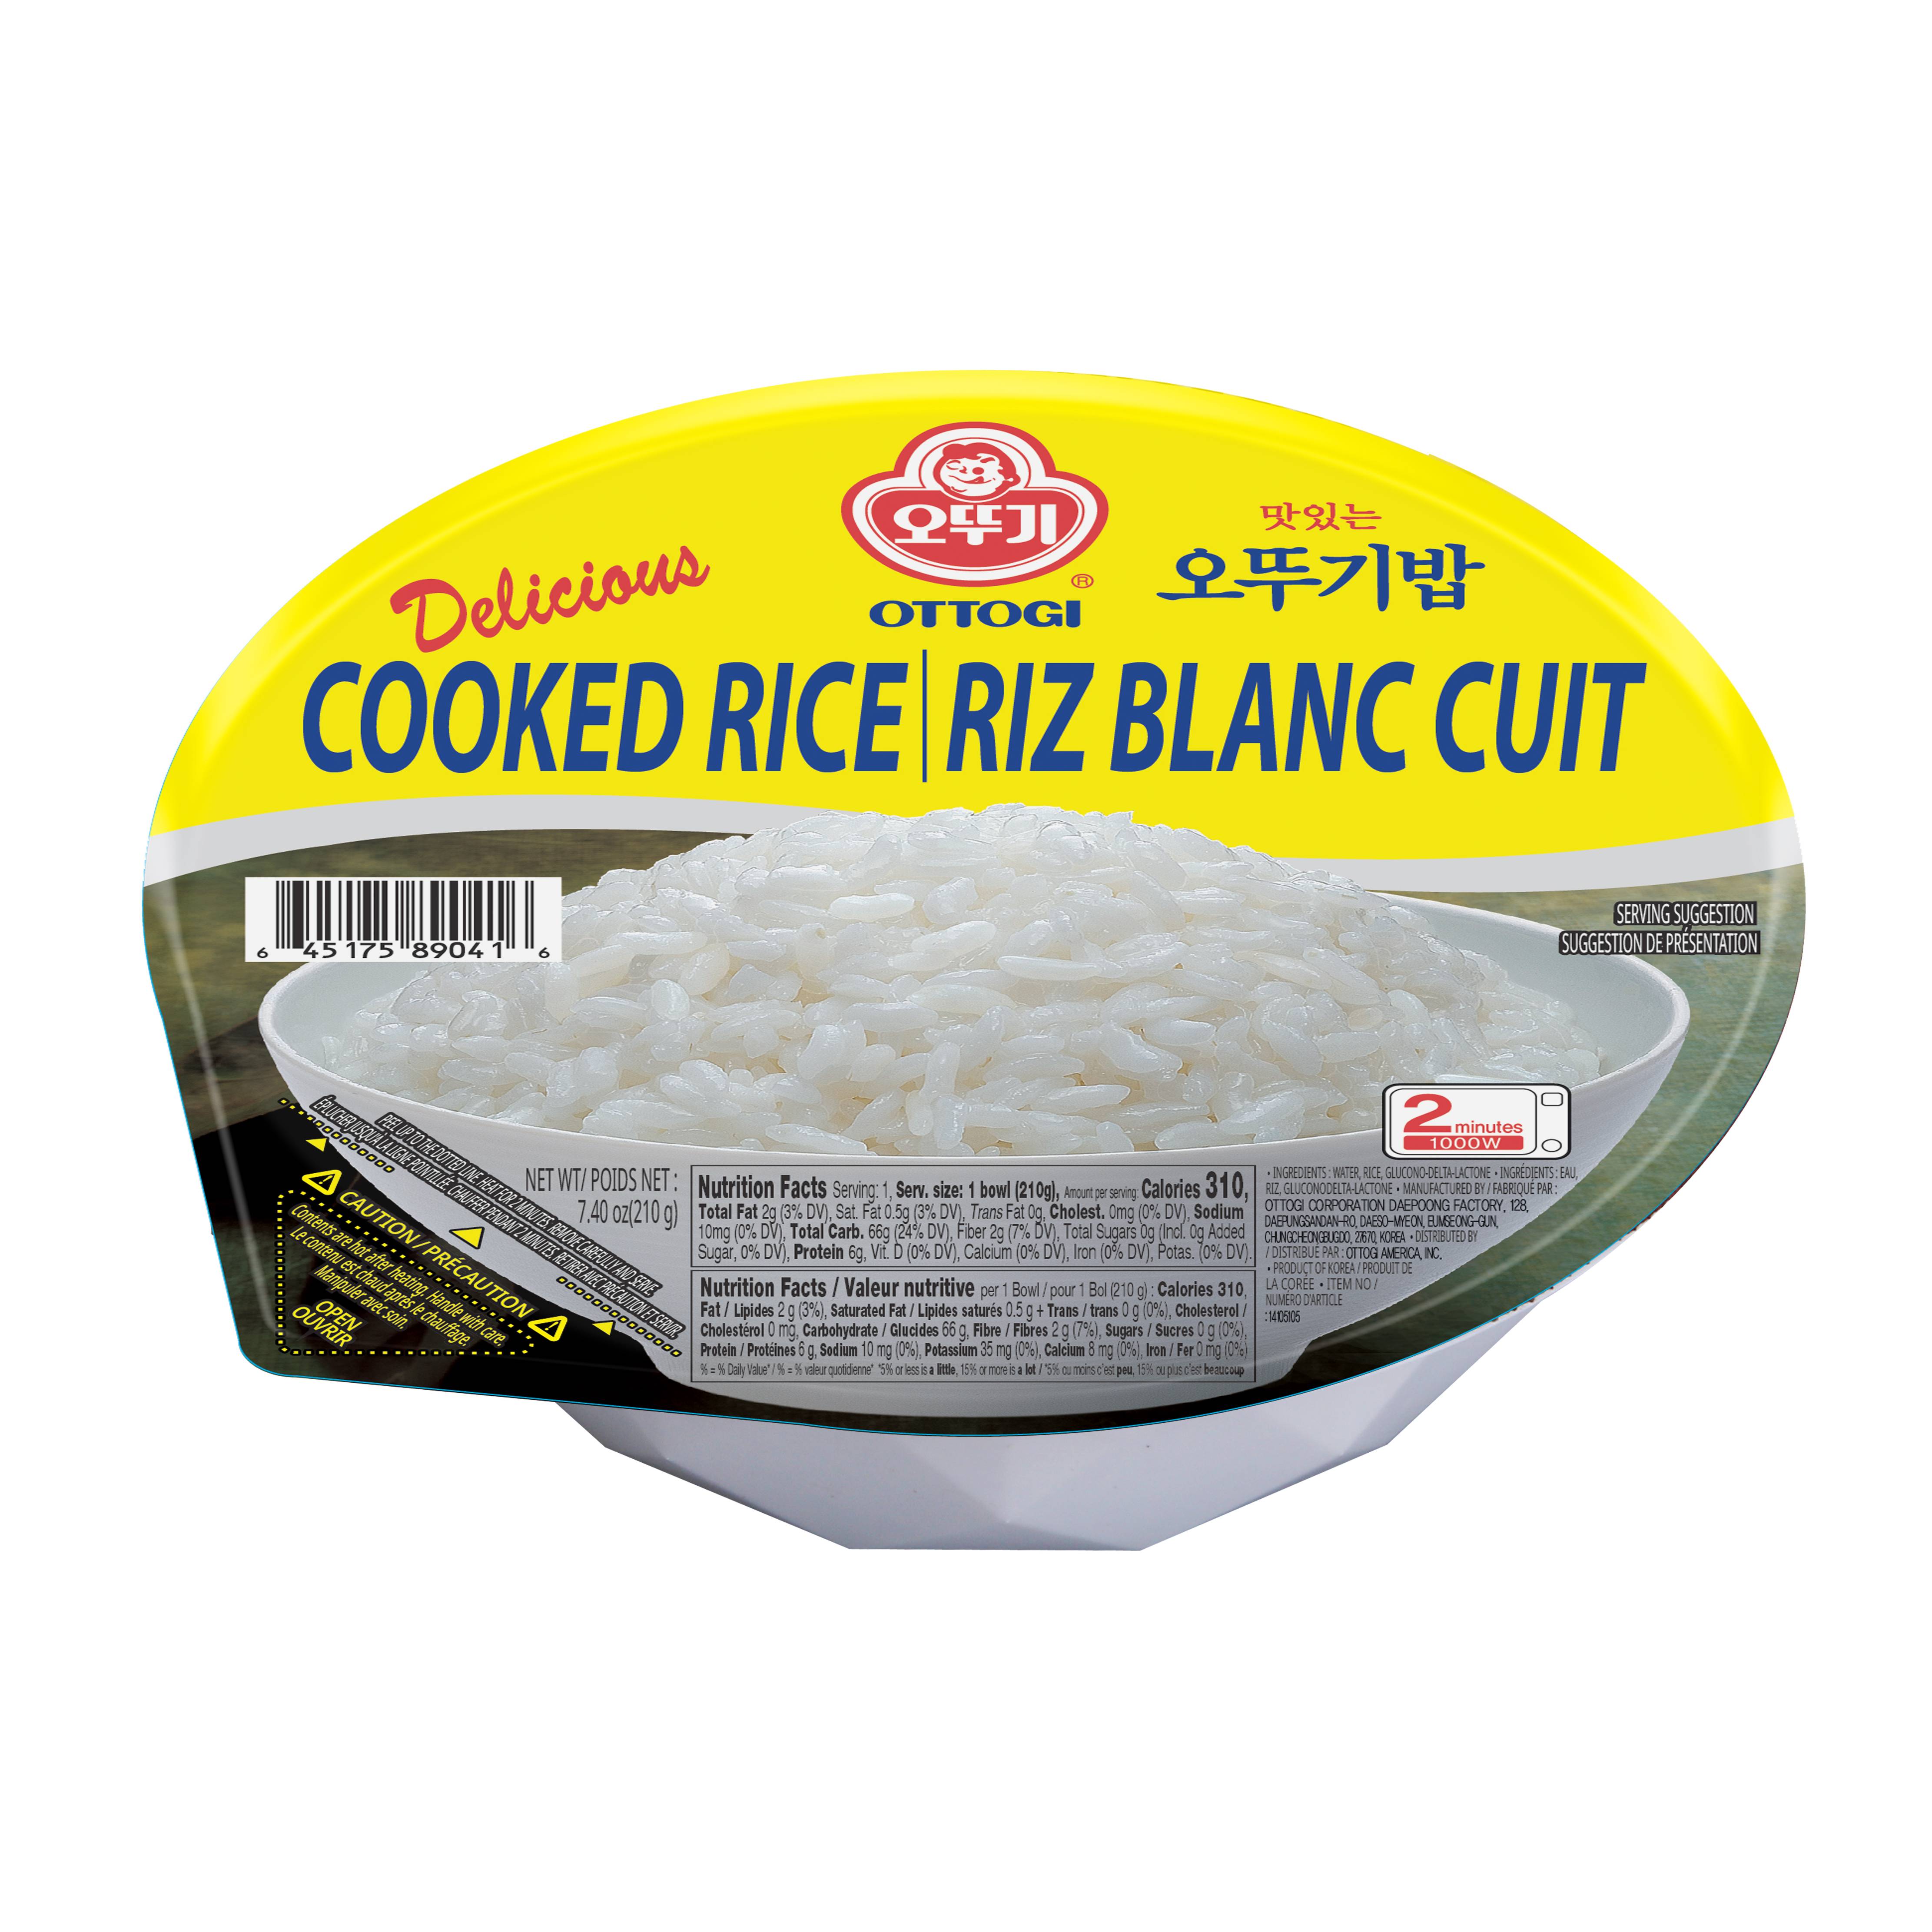 COOKED RICE